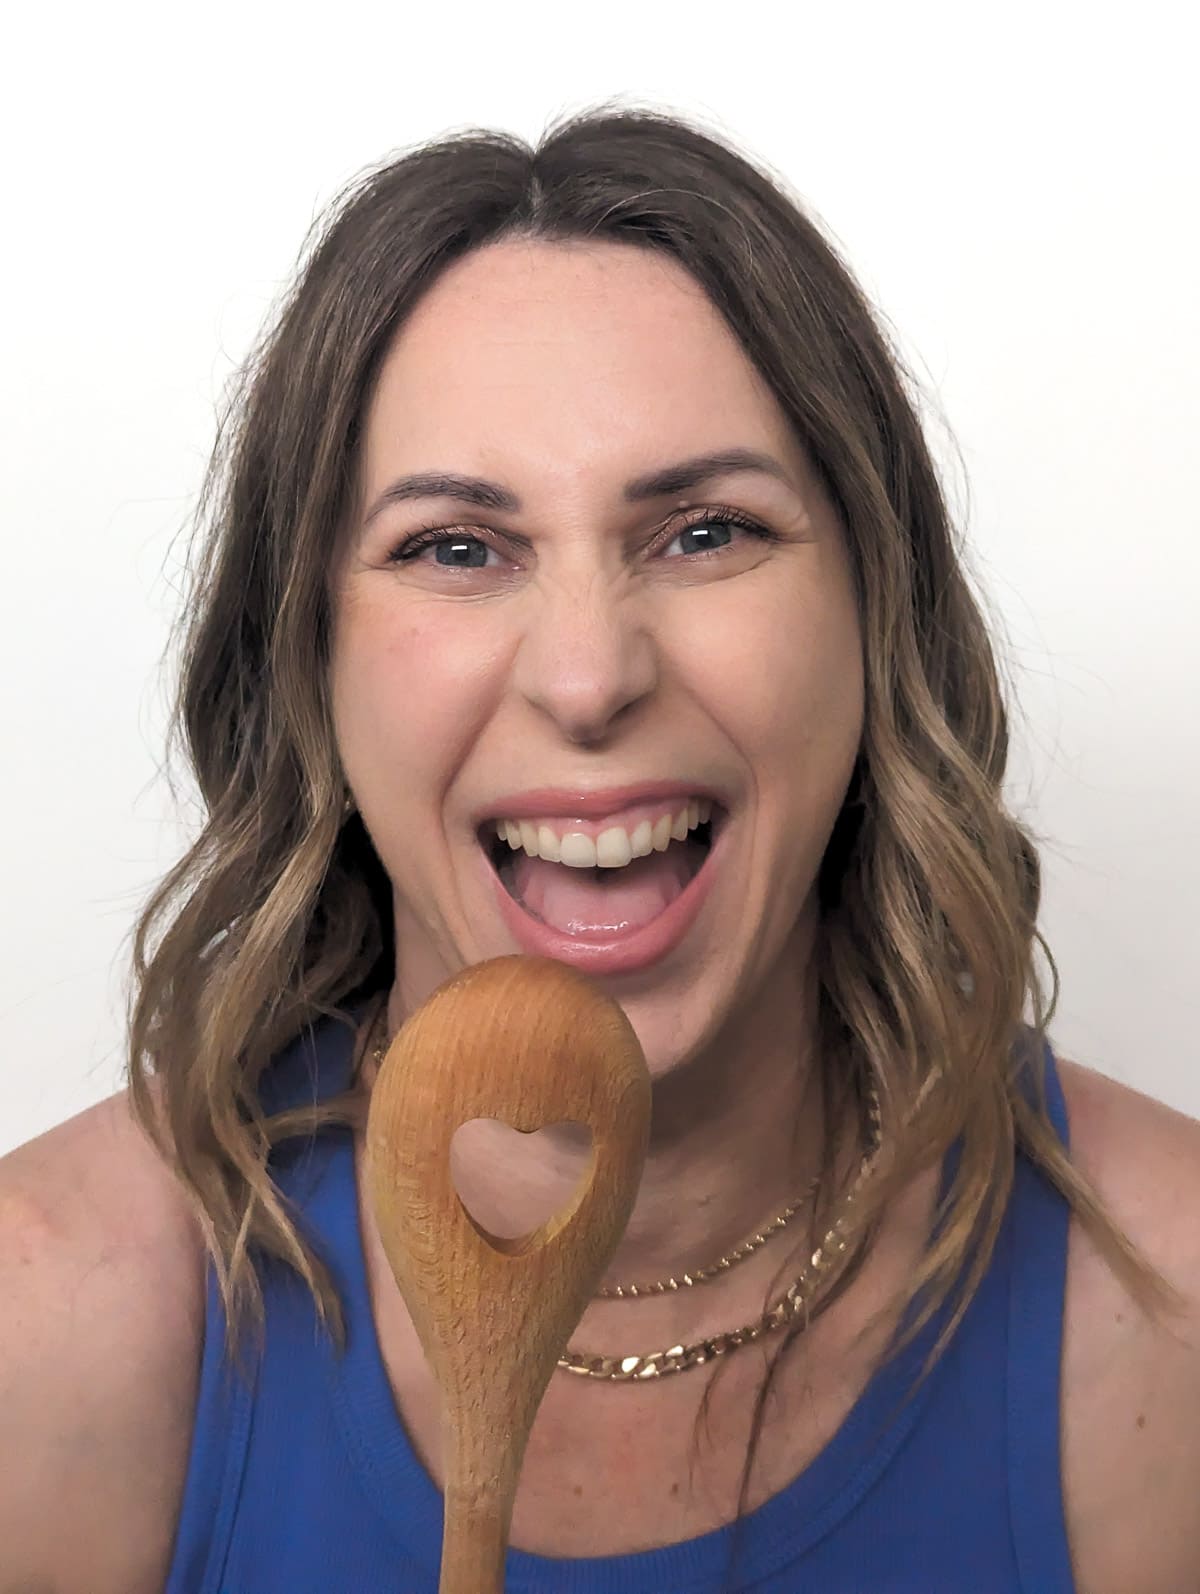 Vanessa Gilic singing into a wooden spoon with heart cut-out.